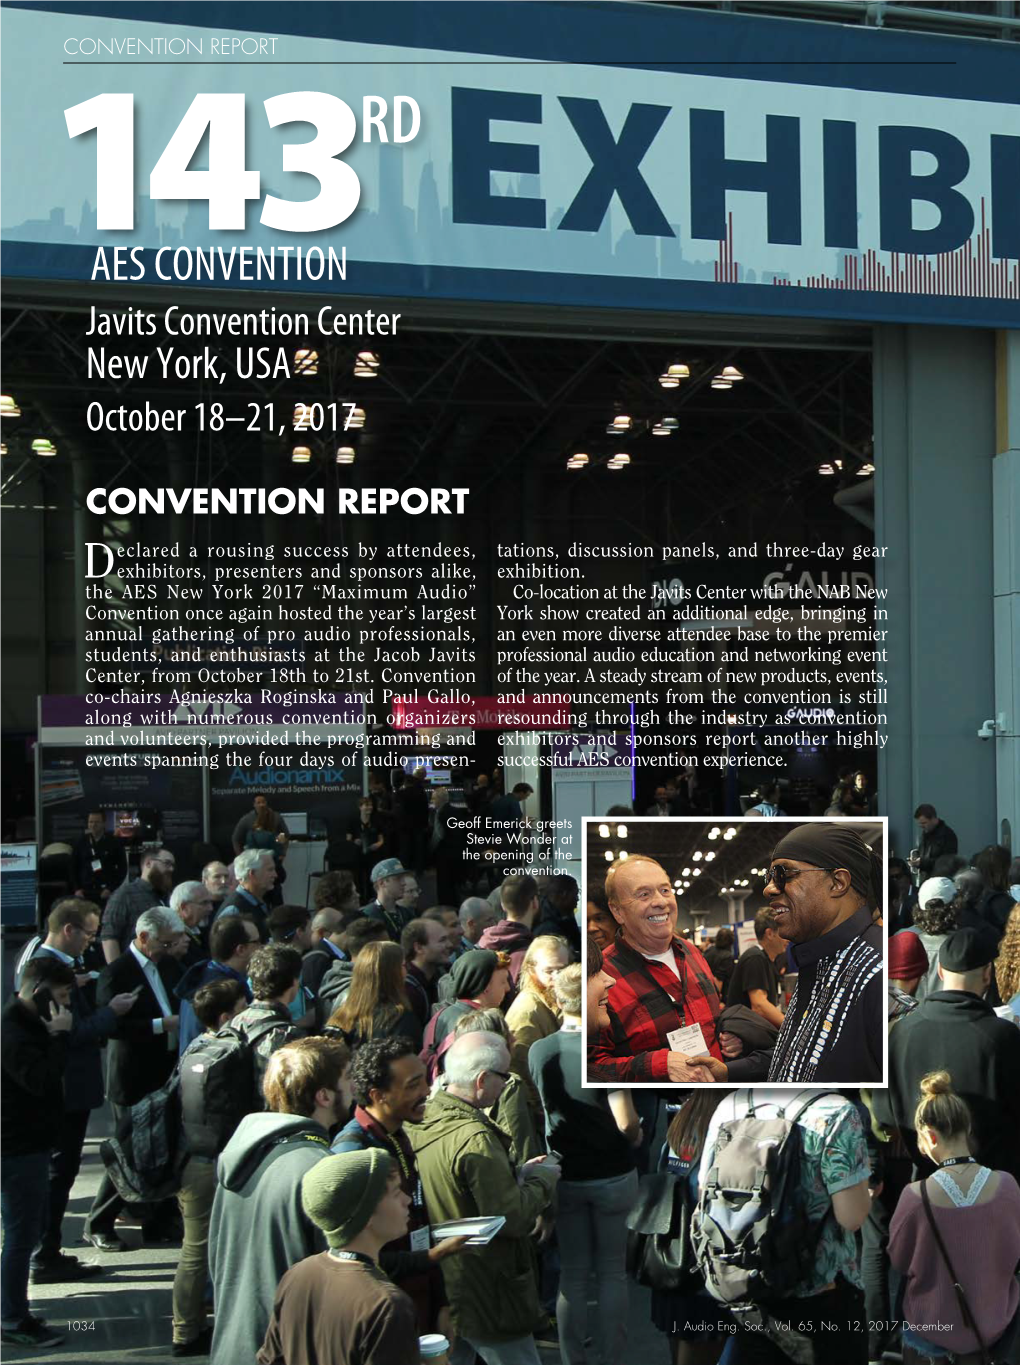 AES CONVENTION Javits Convention Center New York, USA October 18–21, 2017